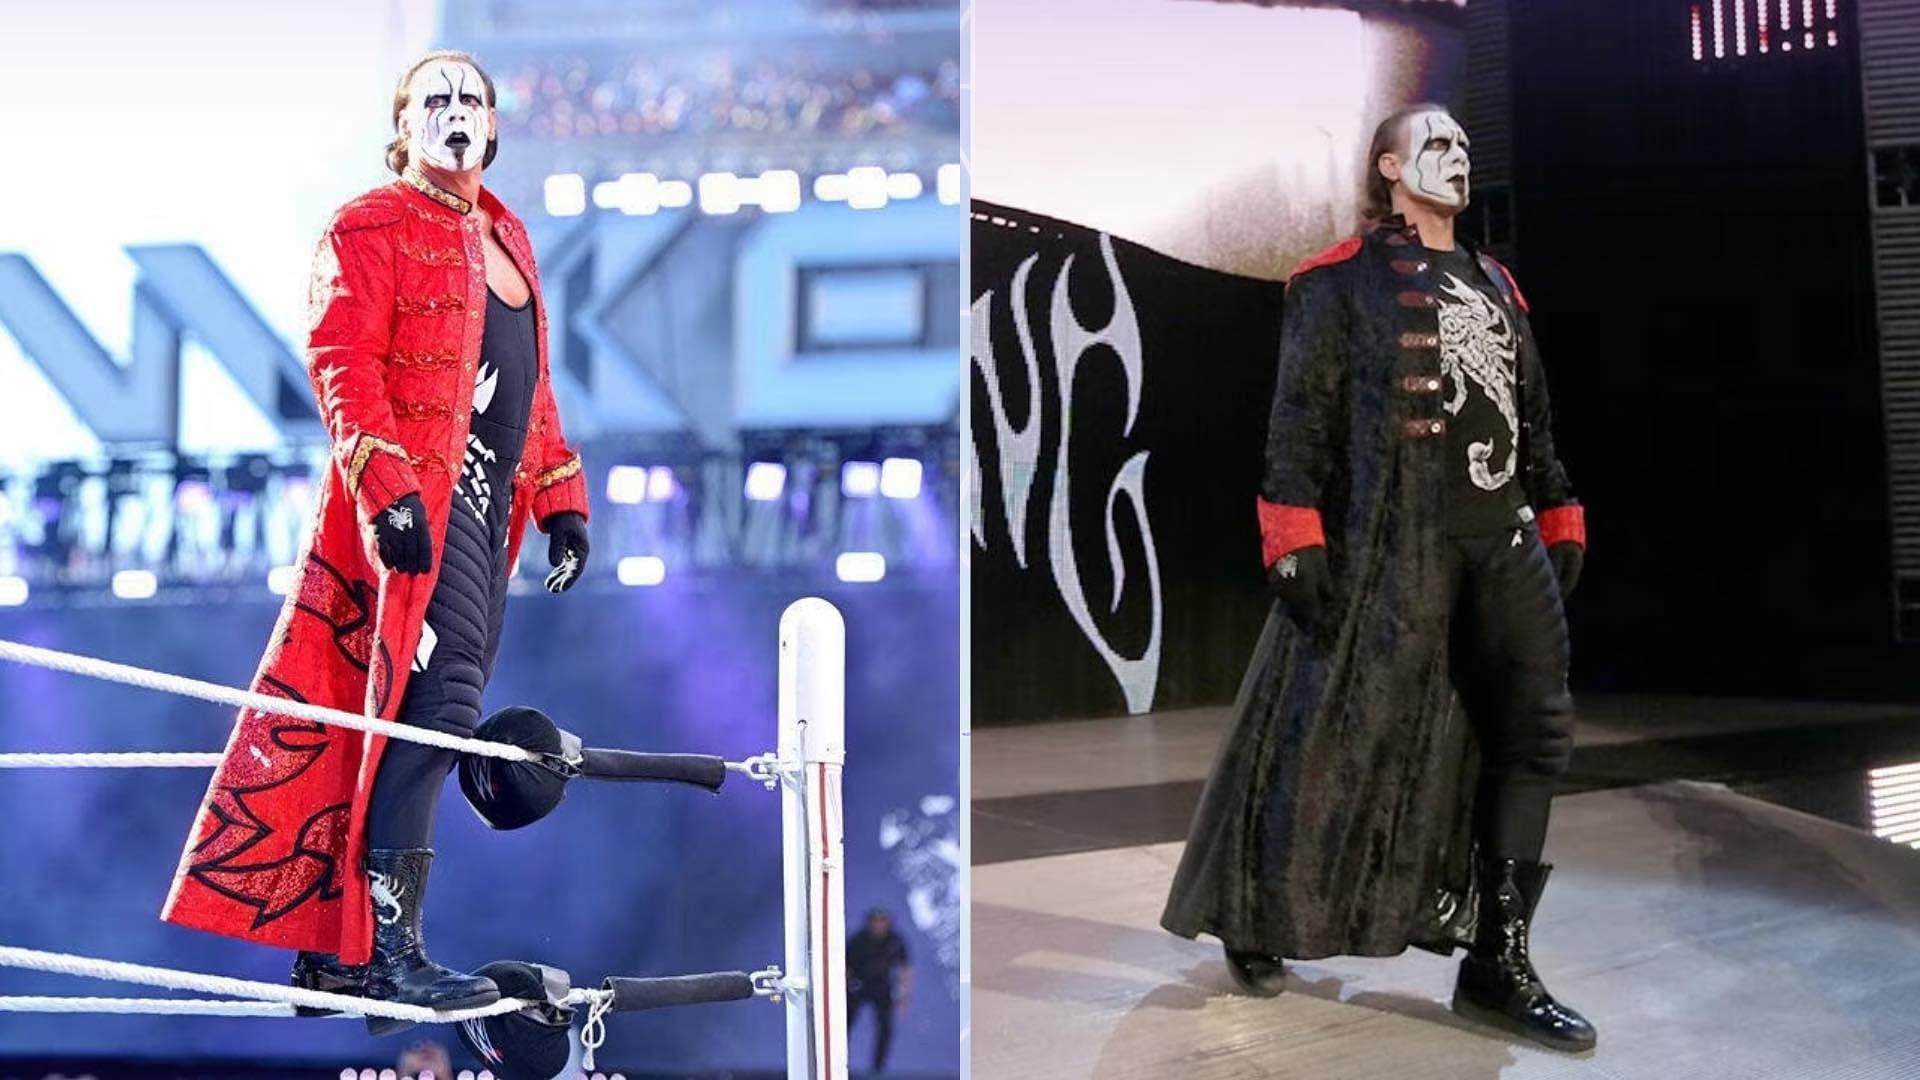 Sting will retire at this week